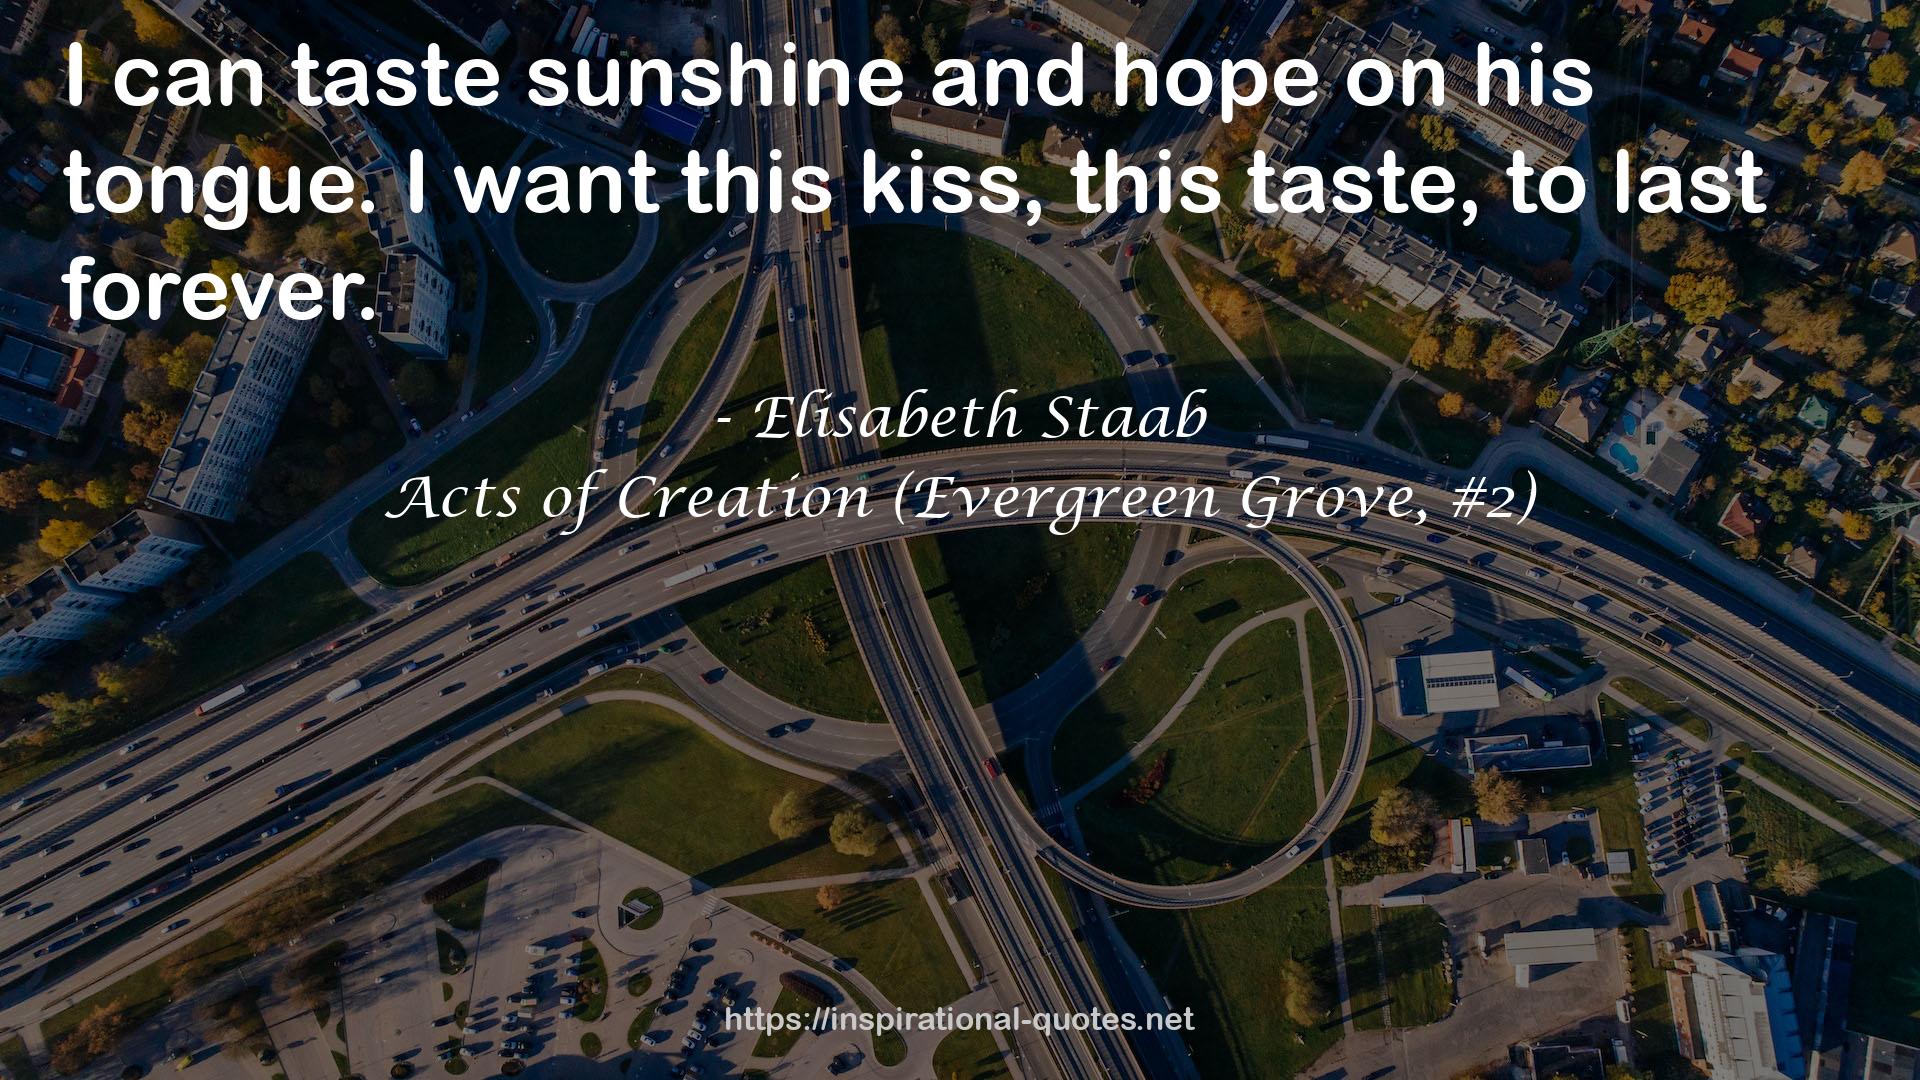 Acts of Creation (Evergreen Grove, #2) QUOTES